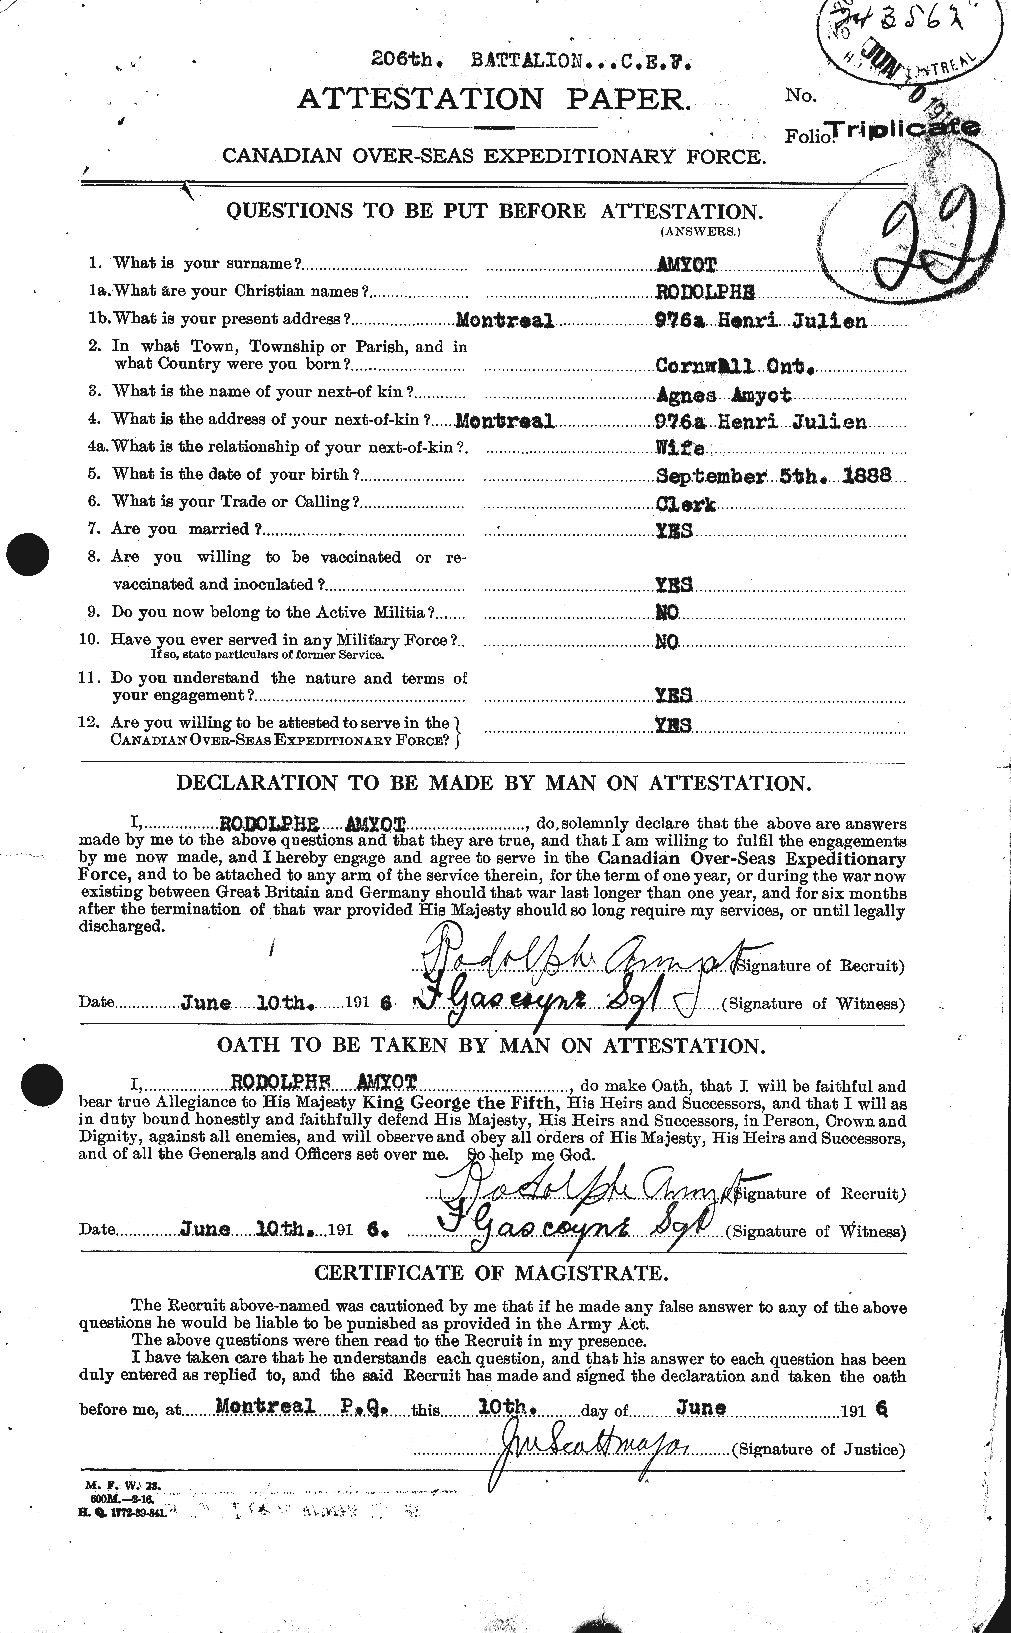 Personnel Records of the First World War - CEF 208568a